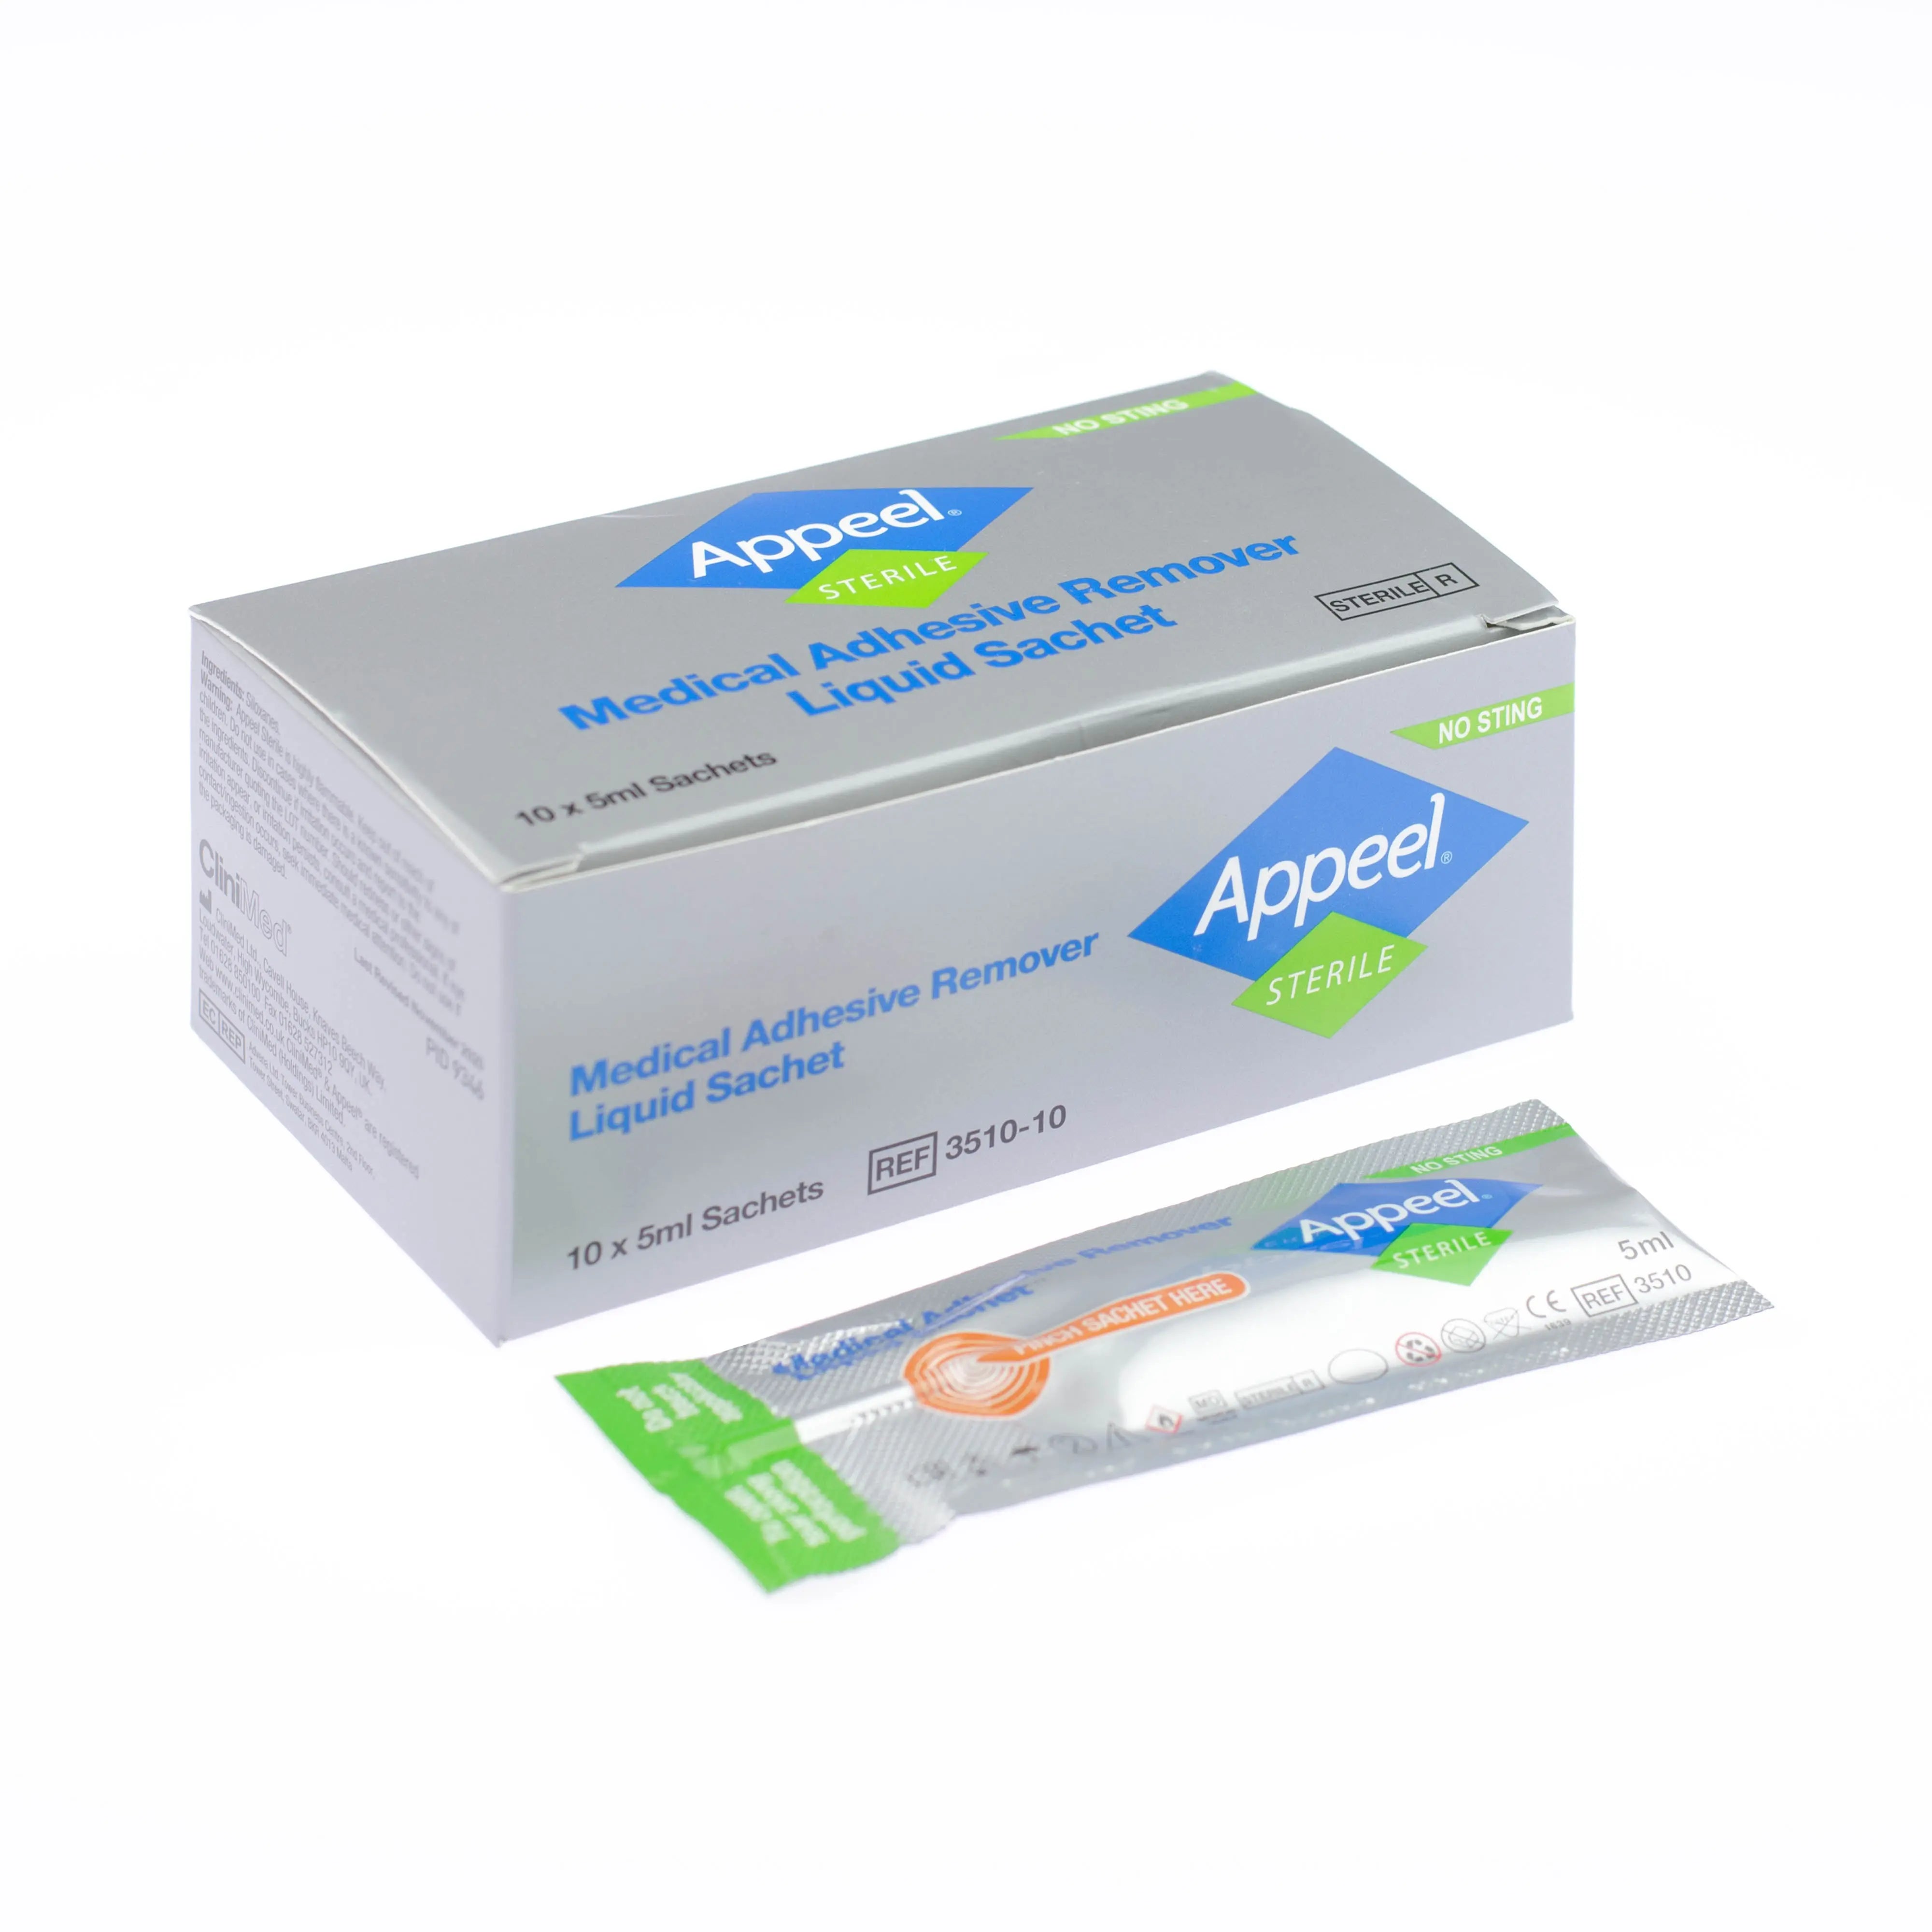 Appeel Sterile Medical Adhesive Remover, CliniMed Wound Care